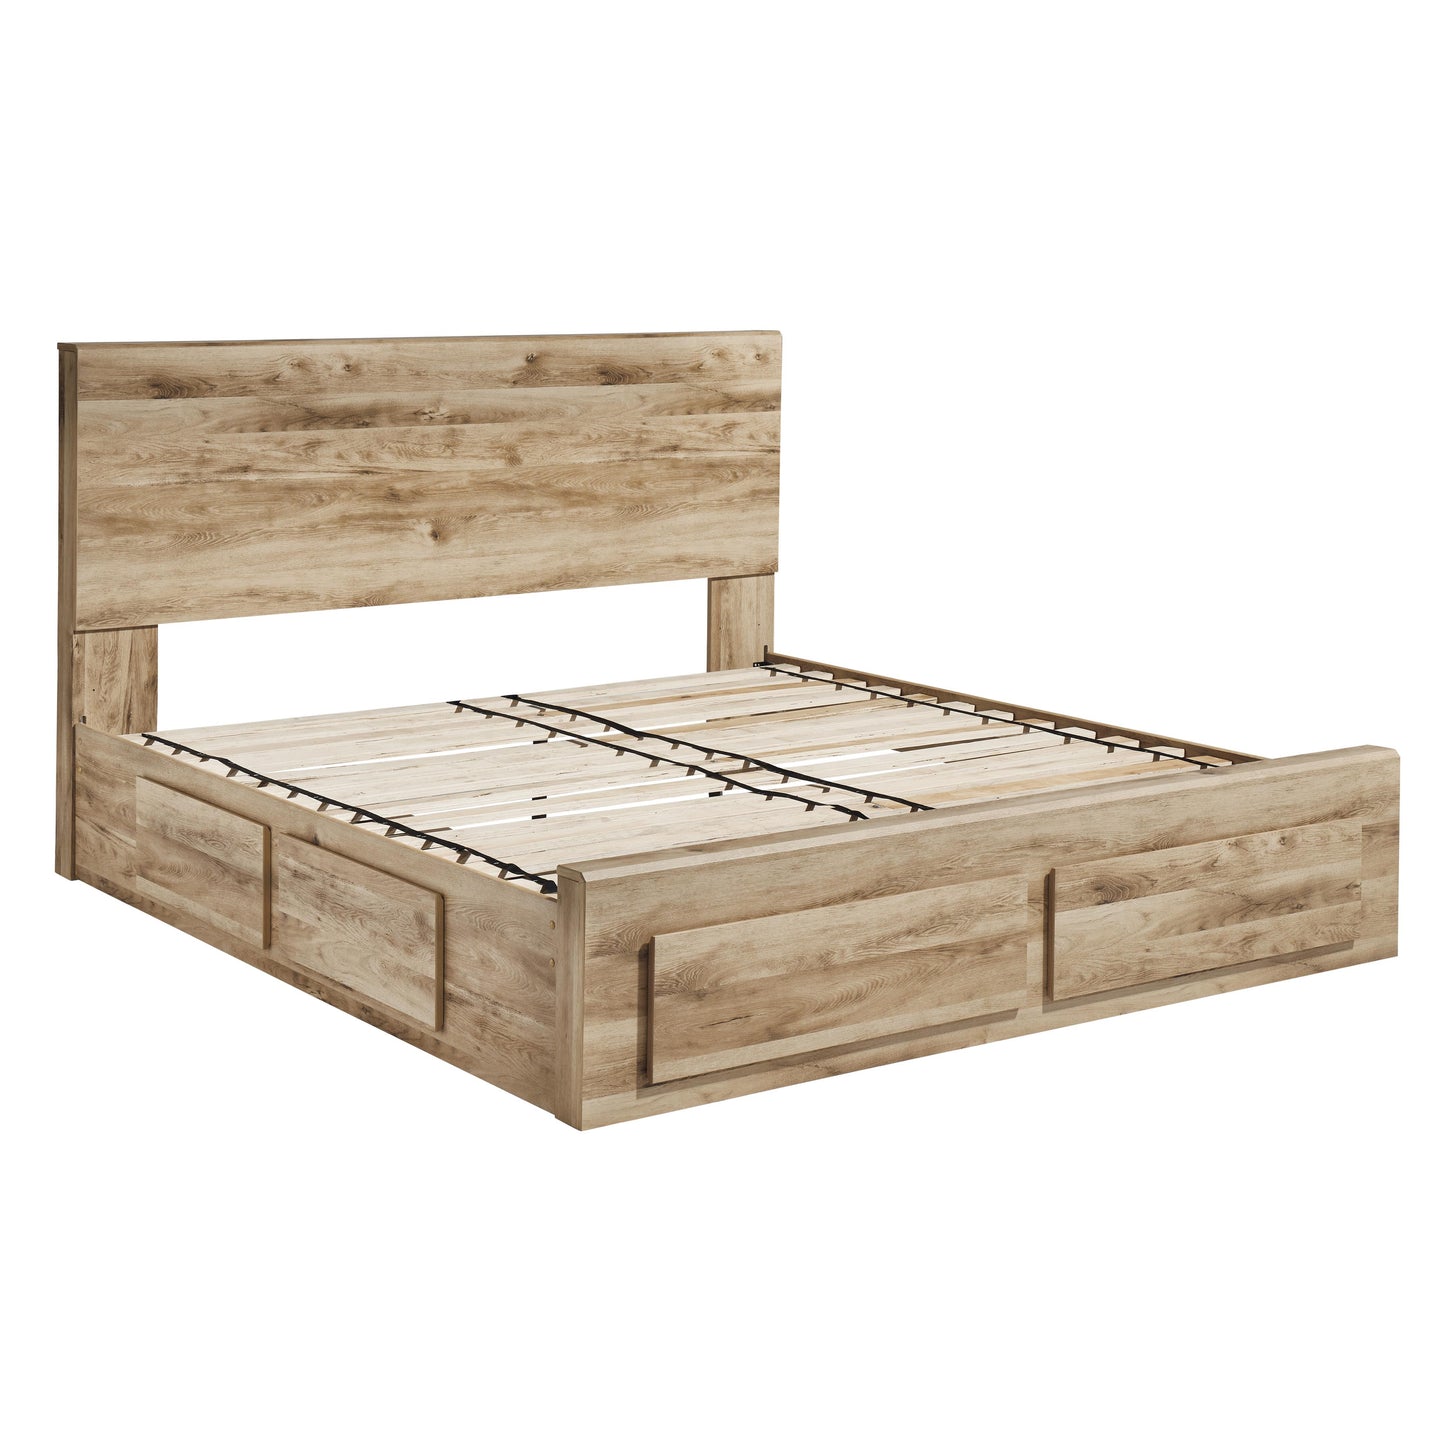 Signature Design by Ashley Hyanna Queen Panel Bed with Storage B1050-57/B1050-54S/B1050-60/B1050-95/B100-13 IMAGE 4